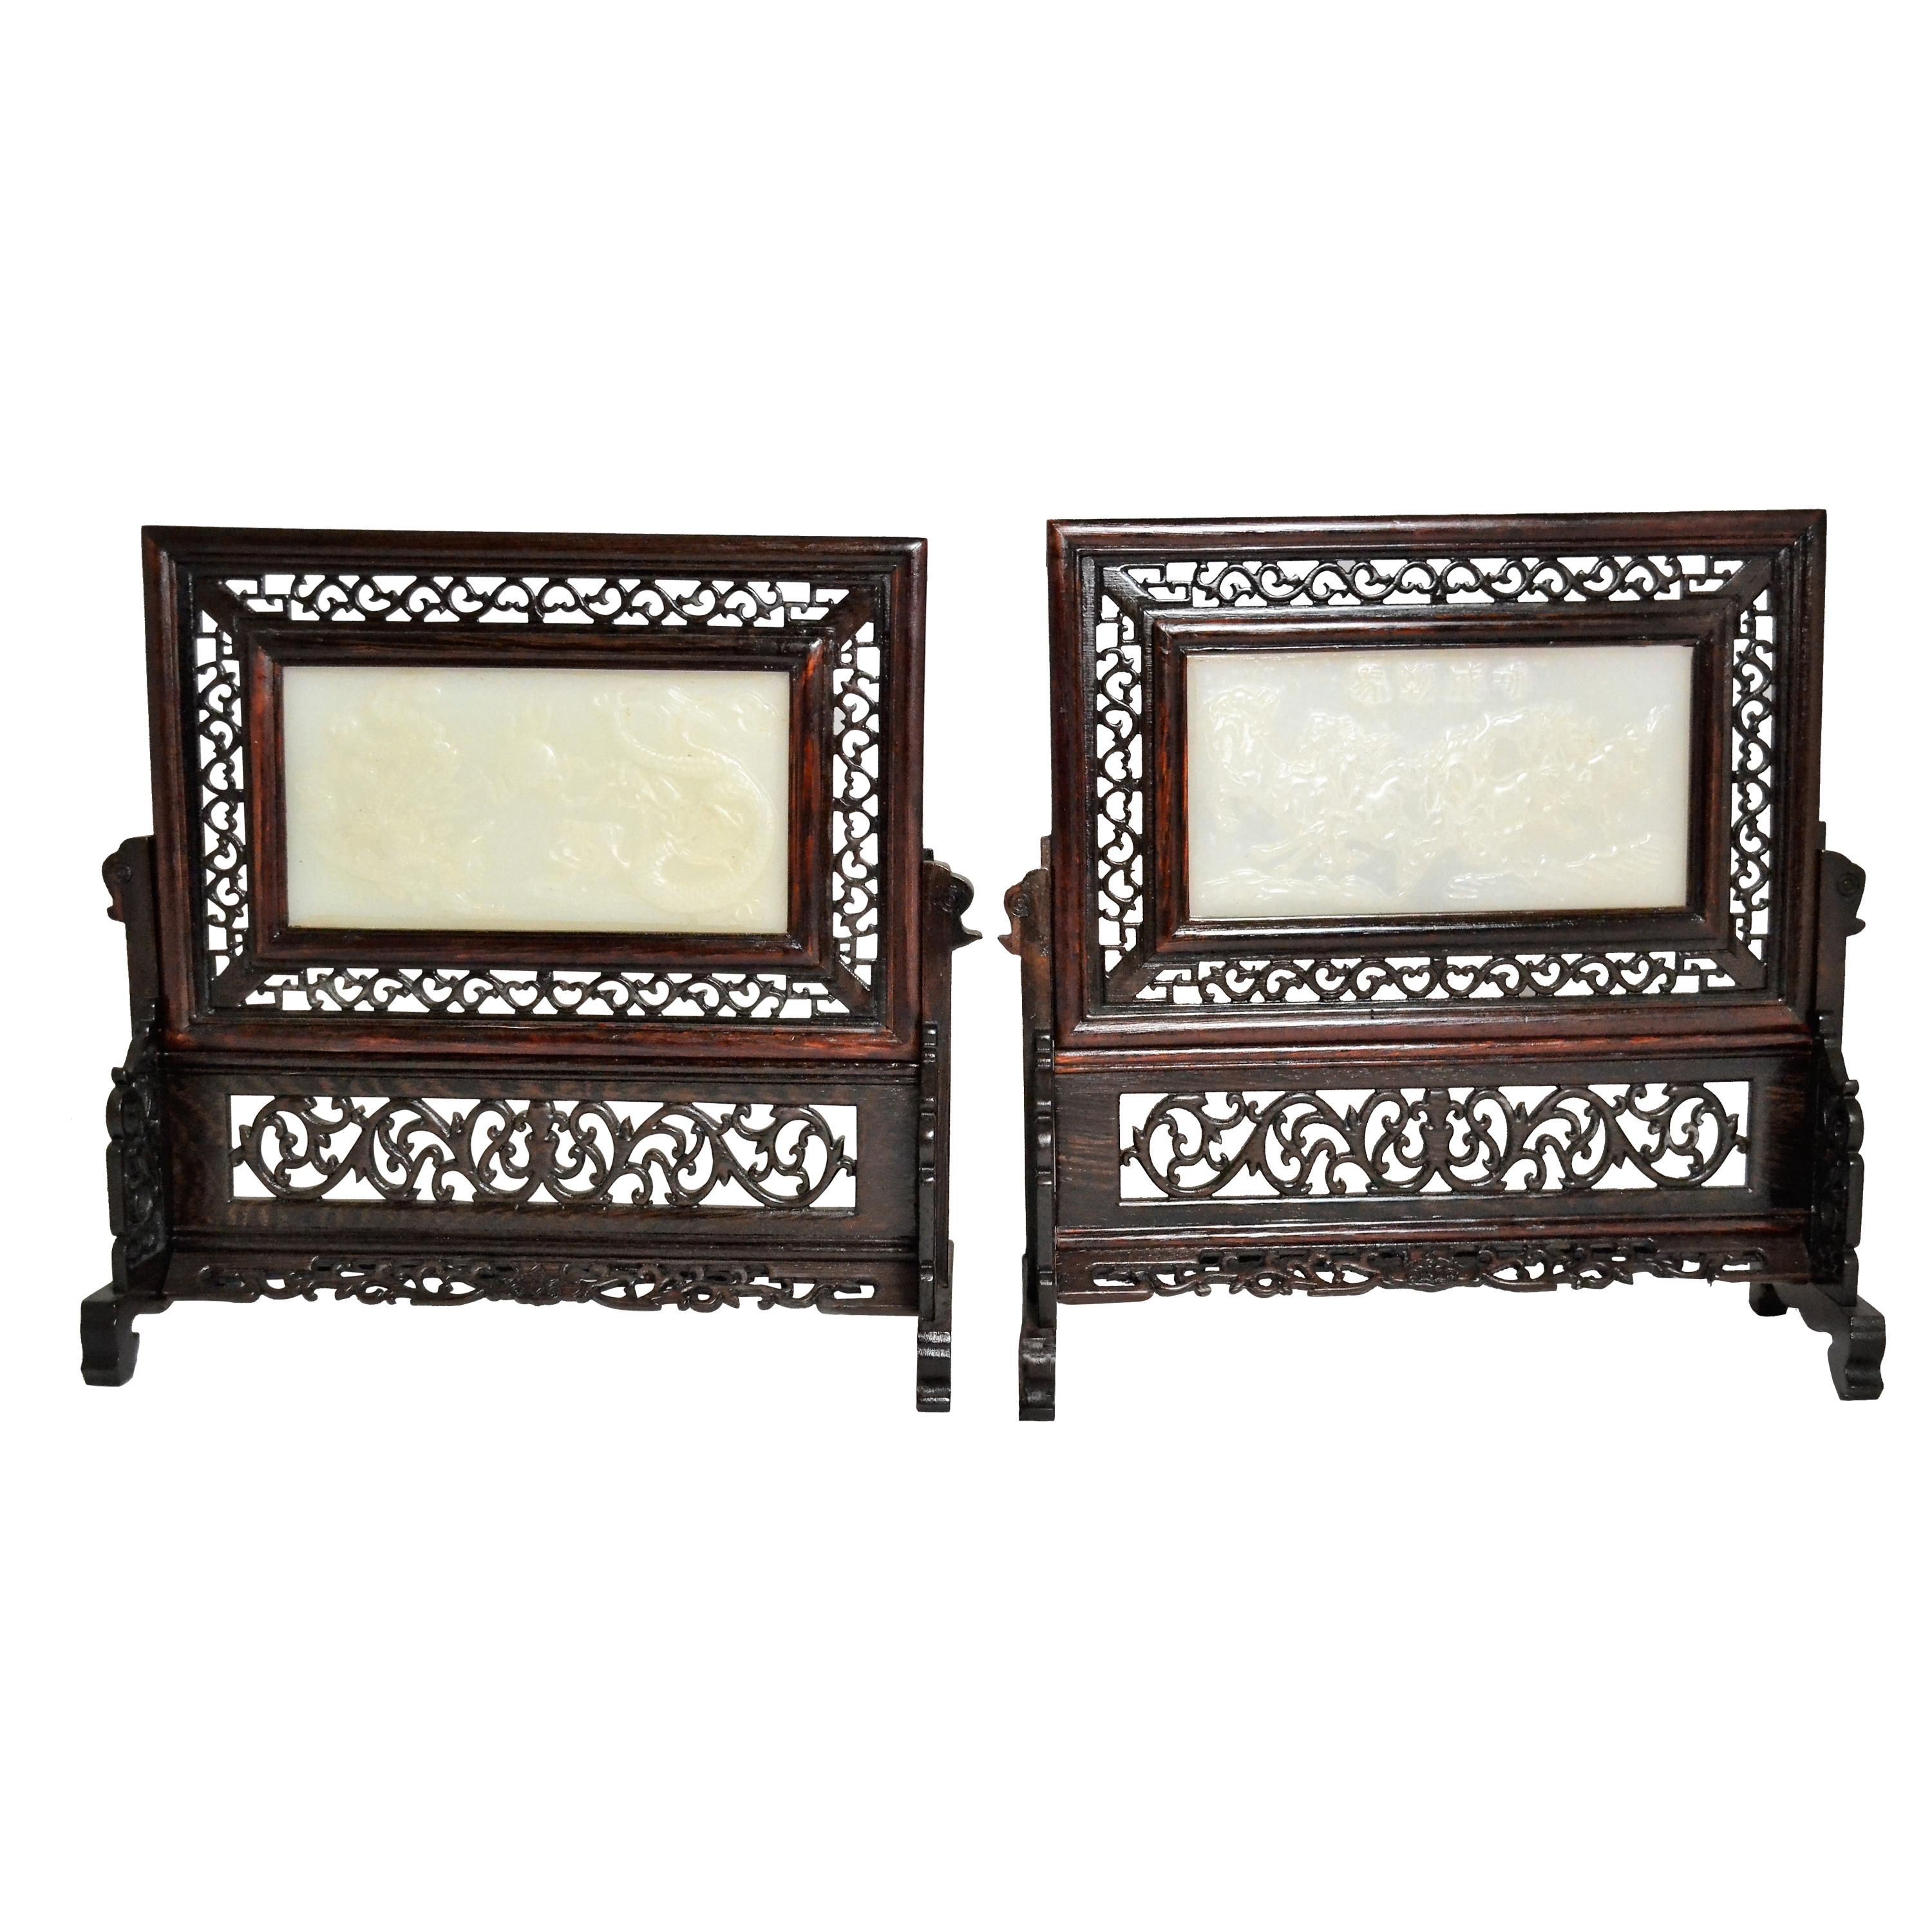 Pair of Antique Chinese Carved Jade Screens on Teak Stands